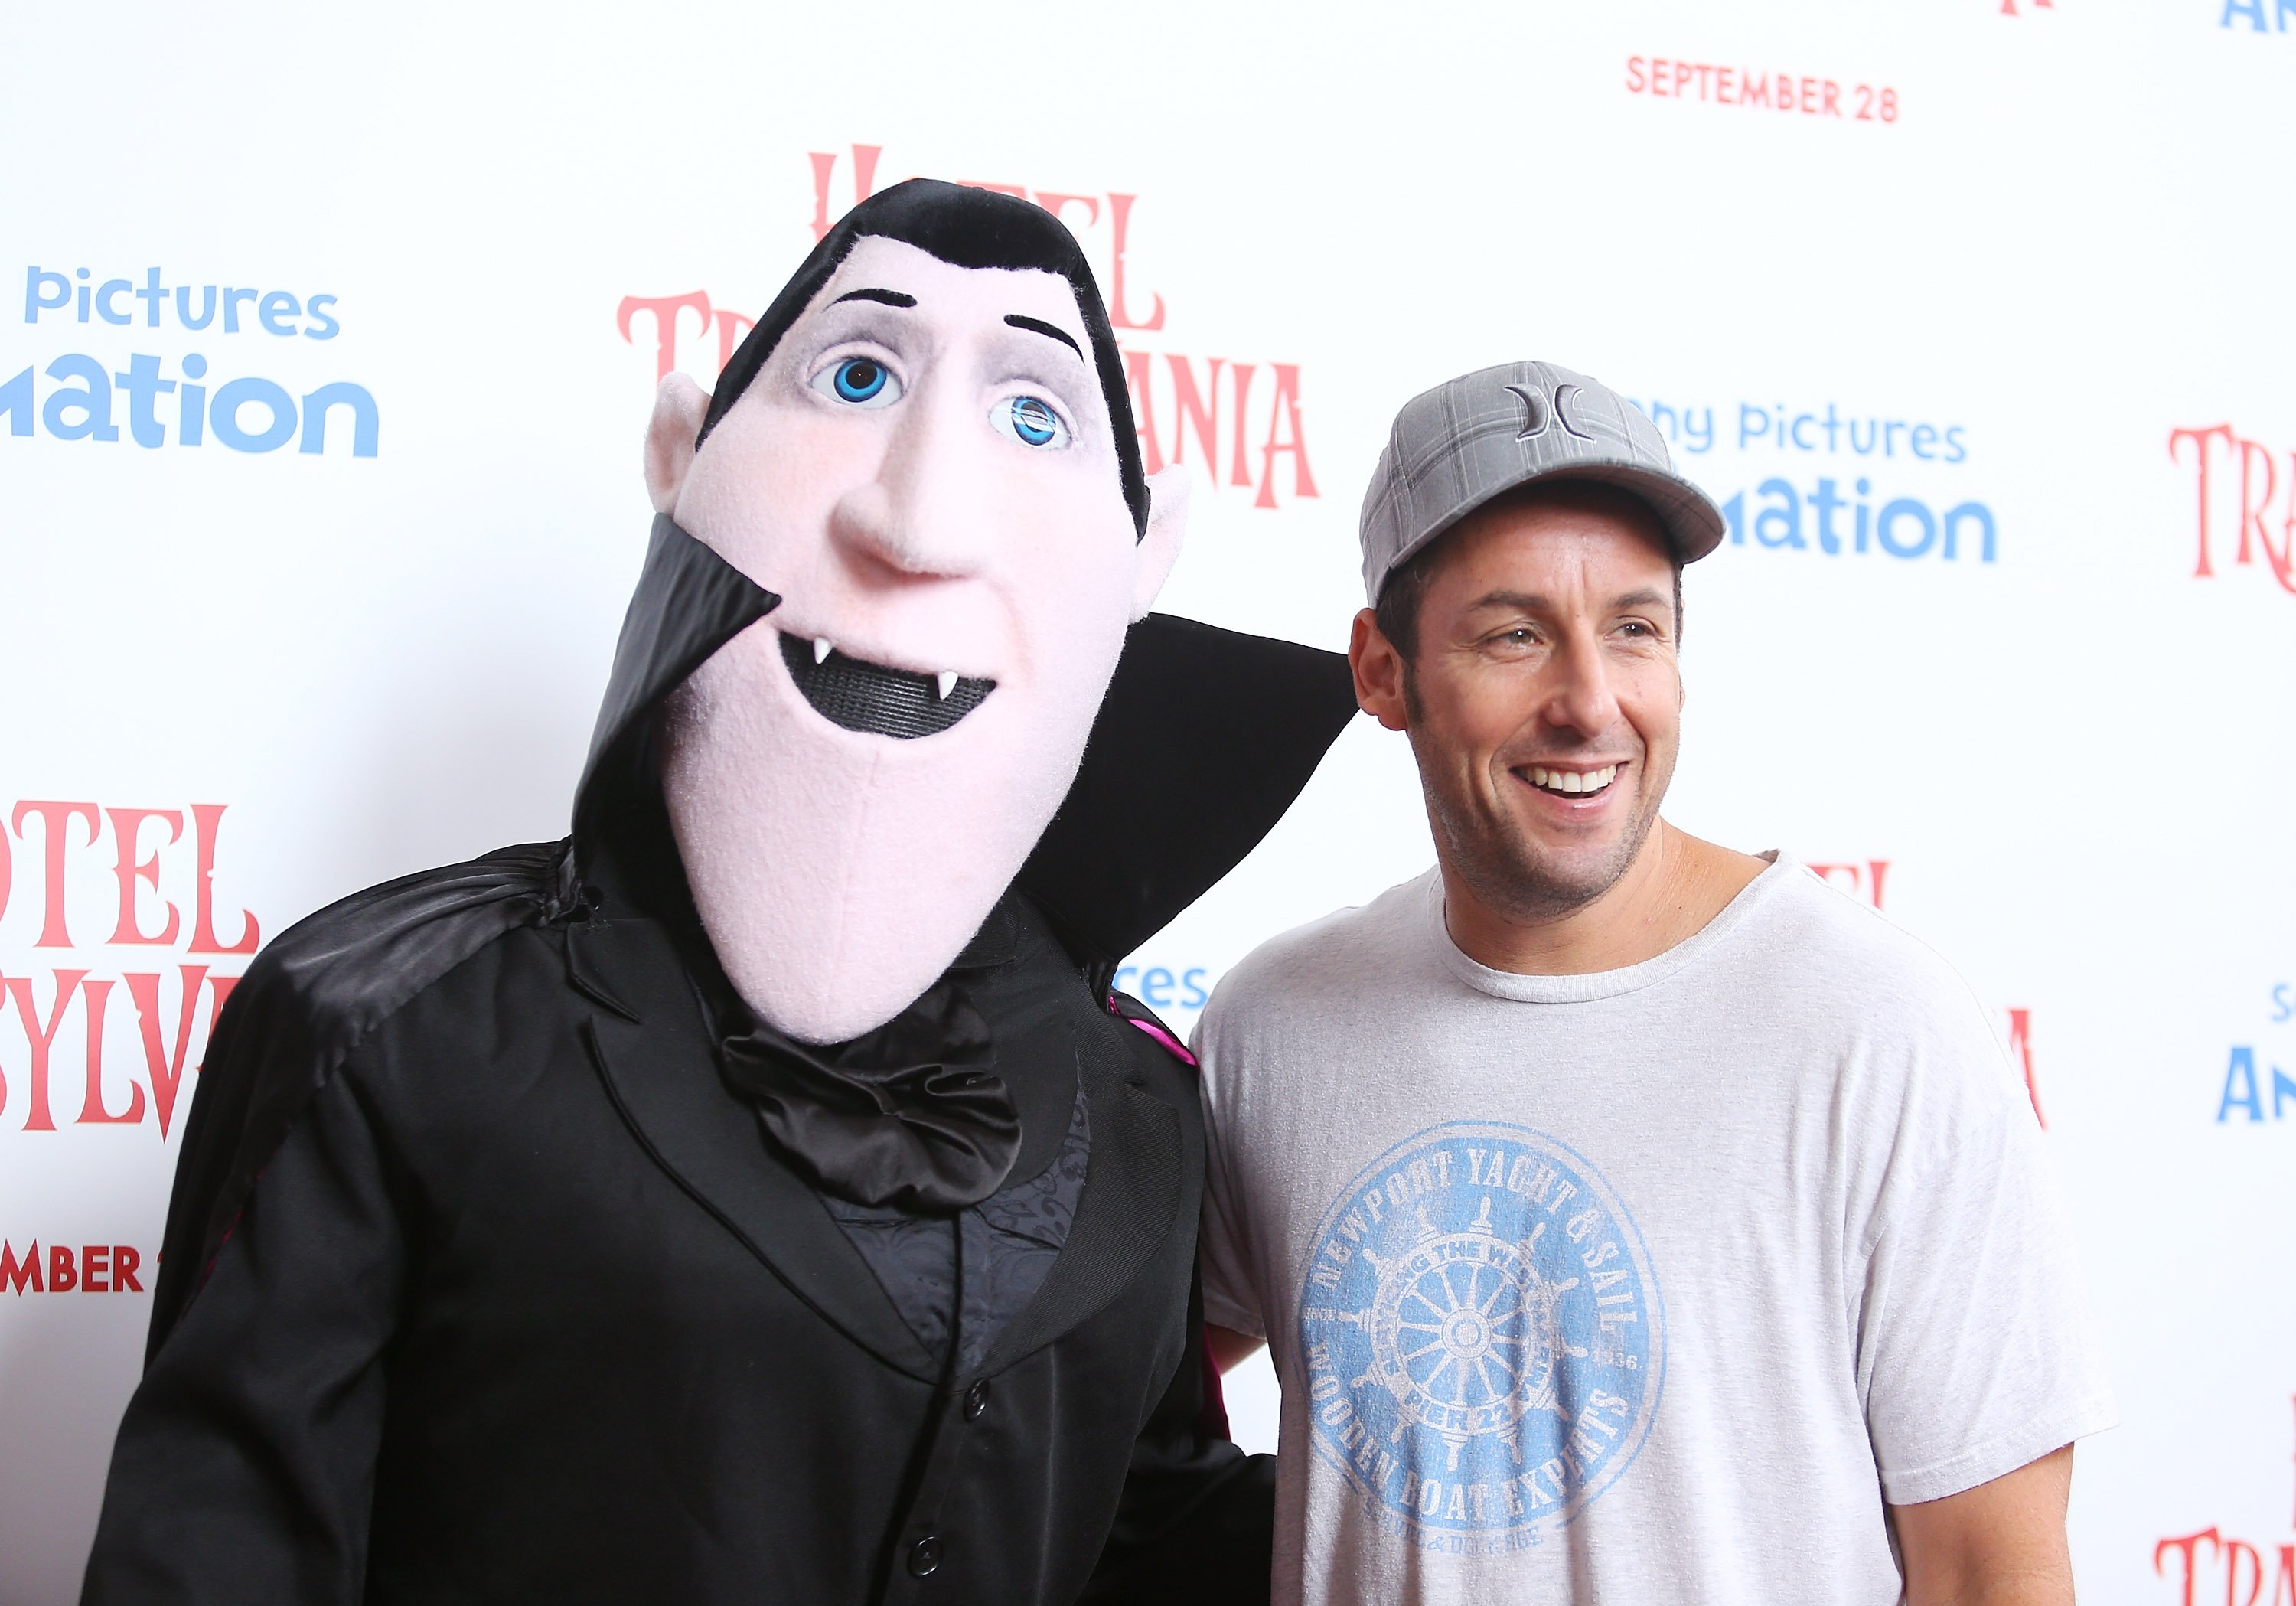 Adam Sandler poses next to his character Drac from Hotel transylvania